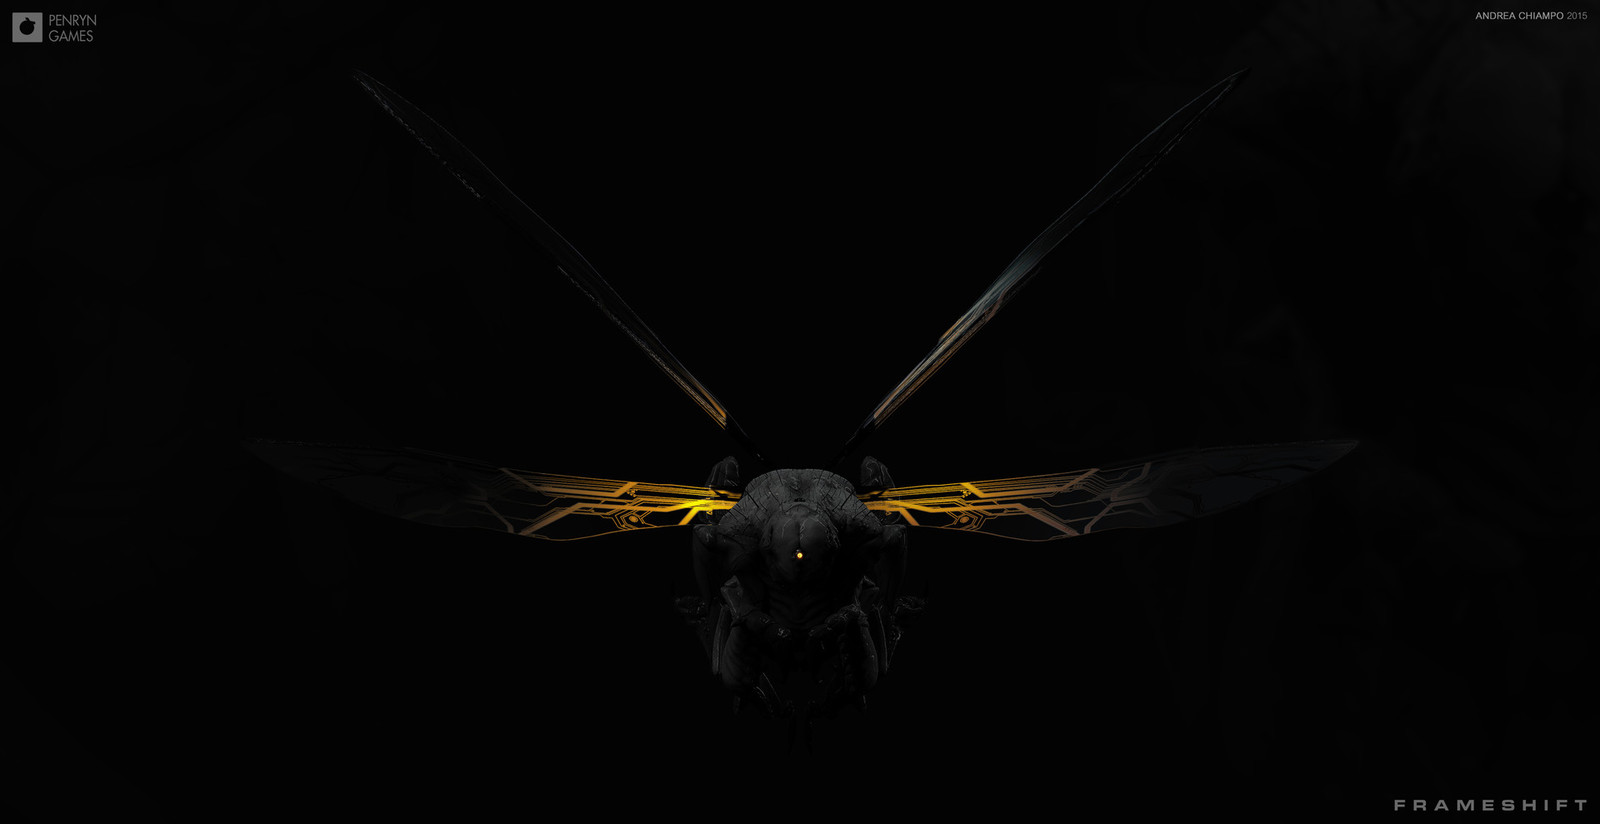 Nocturnal Flight - Wings' Circuits become incandescent to dissipate heat during the flight, especially when it attacks prey!